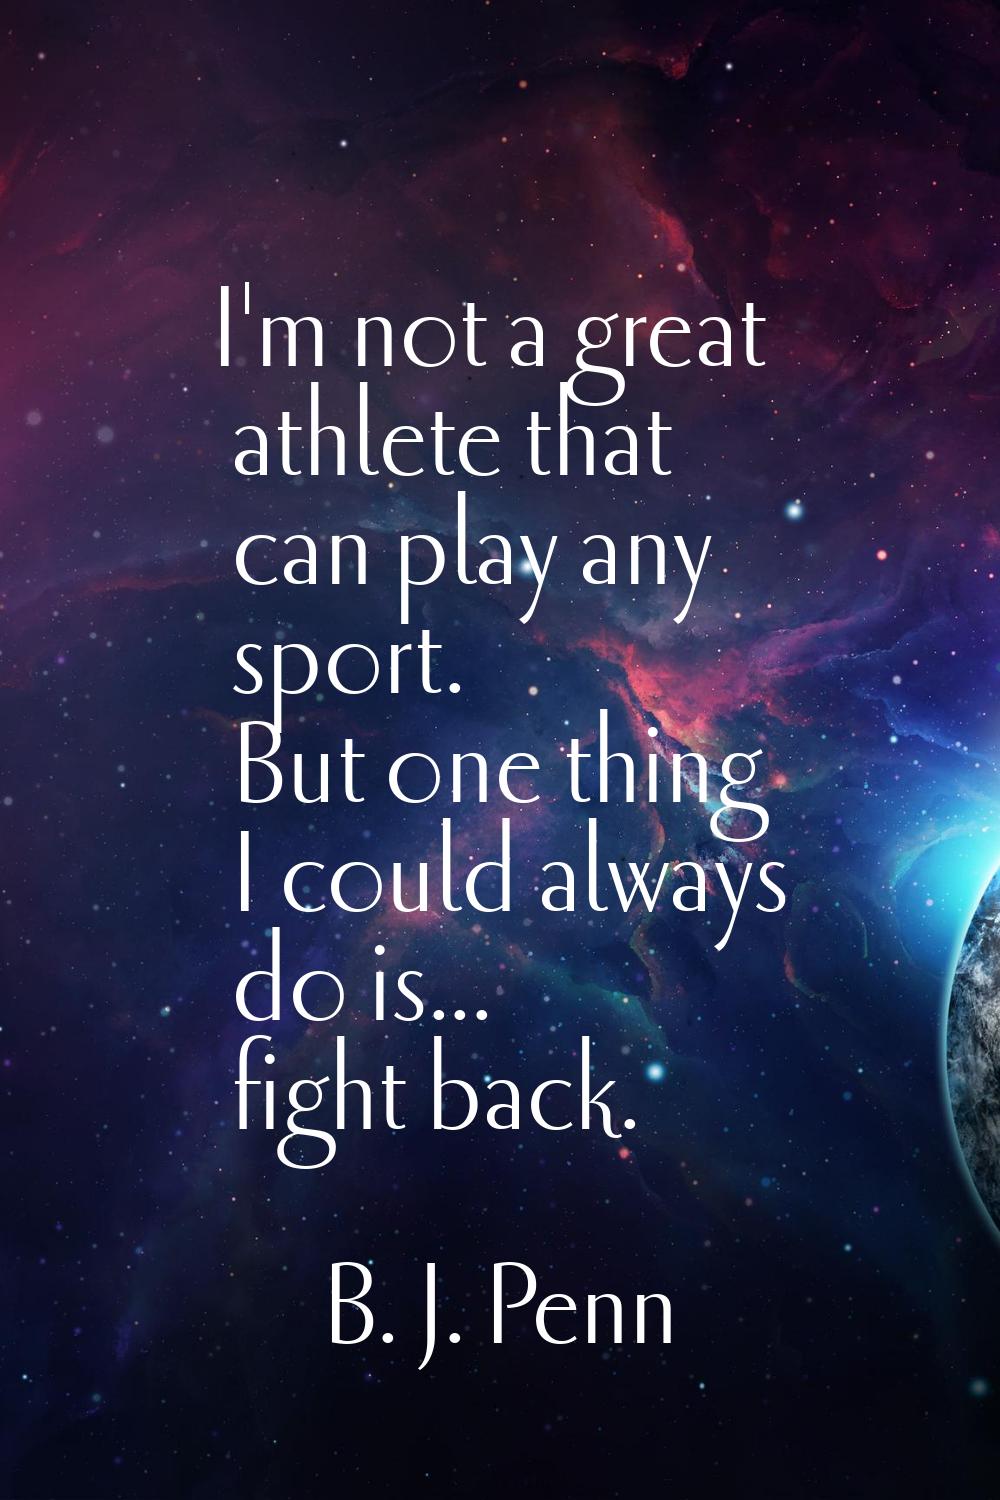 I'm not a great athlete that can play any sport. But one thing I could always do is... fight back.